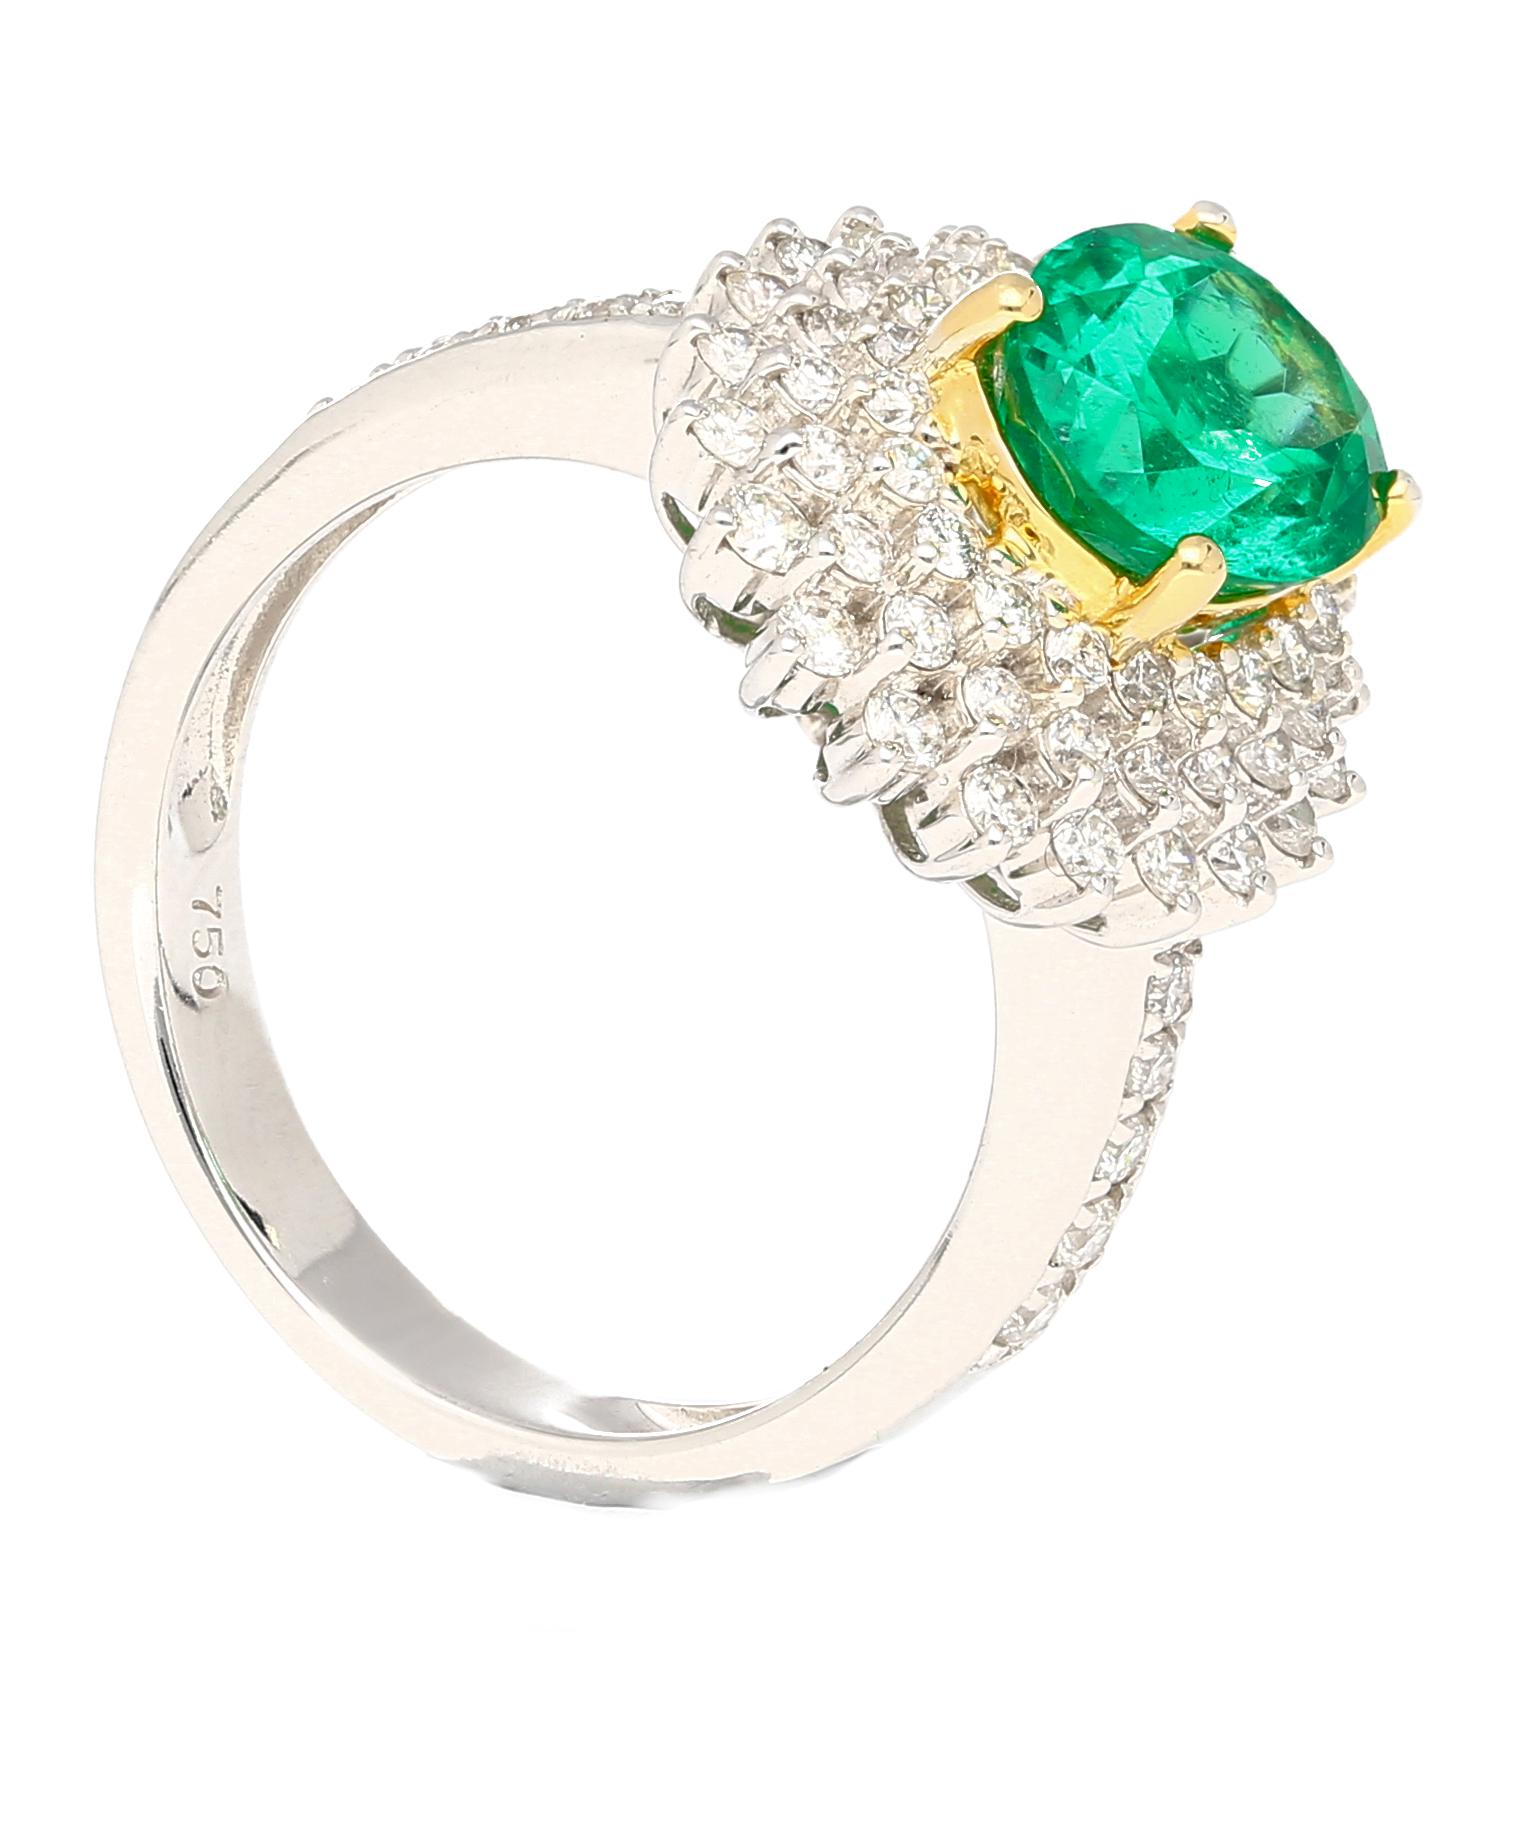 GIA certified 1.76 carat minor oil Colombian emerald and round cut diamond cluster ring. Set in 18 karat solid gold. The ring features a white gold ring shank and frame, with the prongs and basket being yellow gold, offering the perfect color